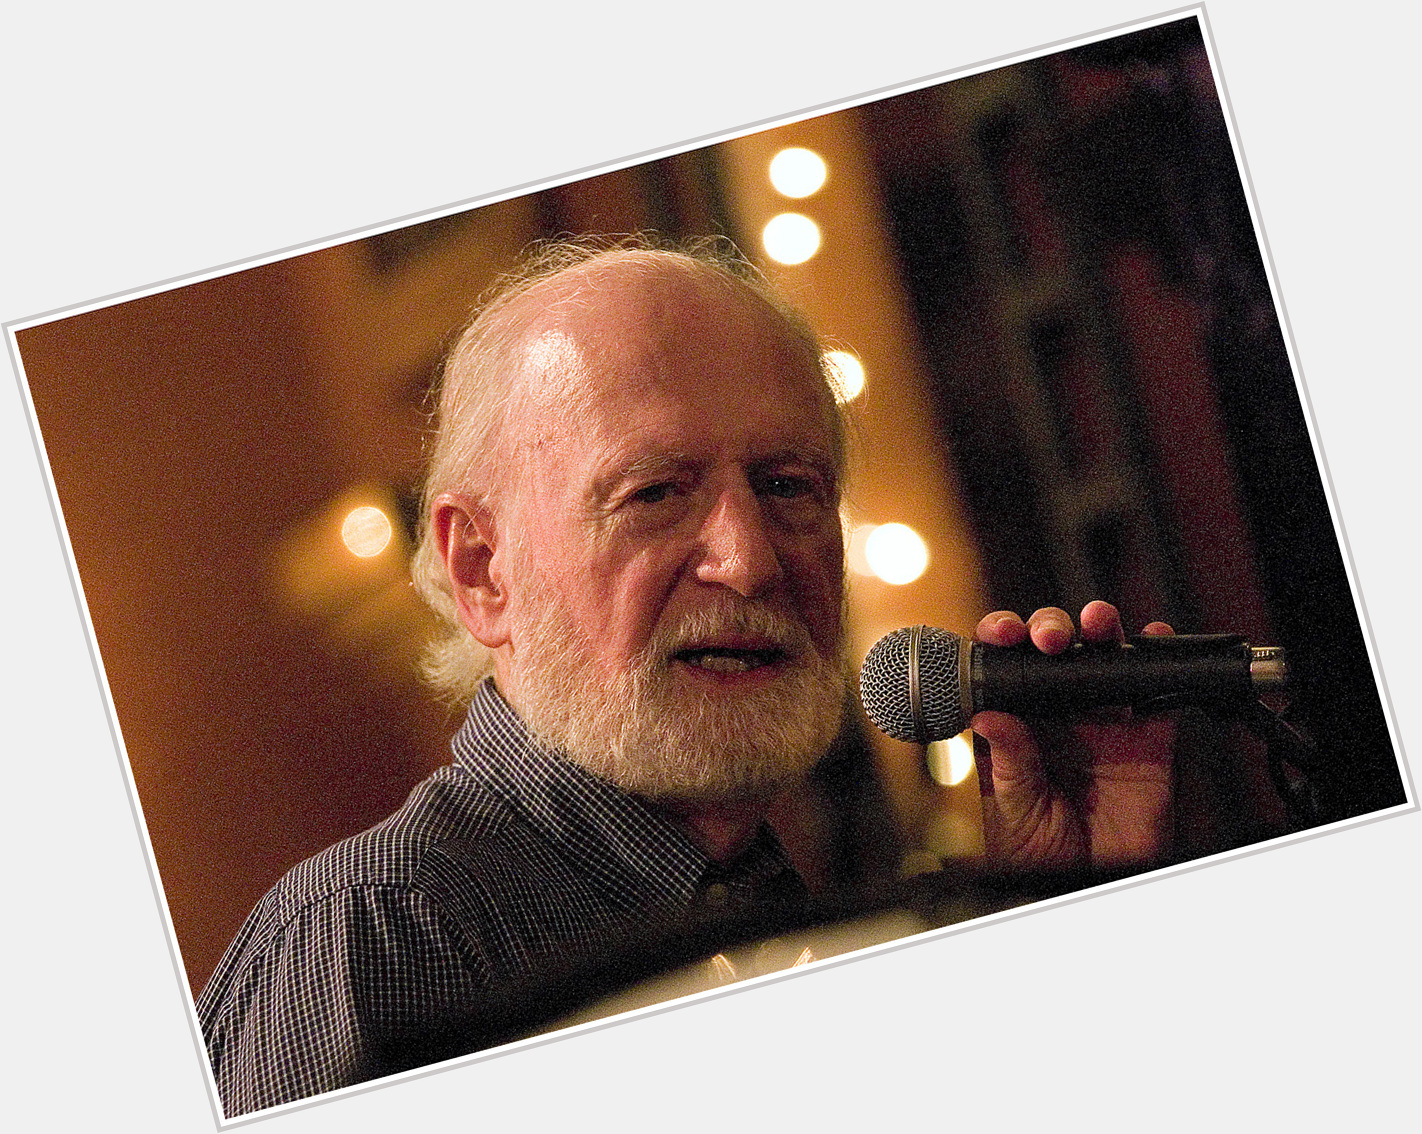 <a href="/hot-men/mose-allison/where-dating-news-photos">Mose Allison</a> Slim body,  grey hair & hairstyles